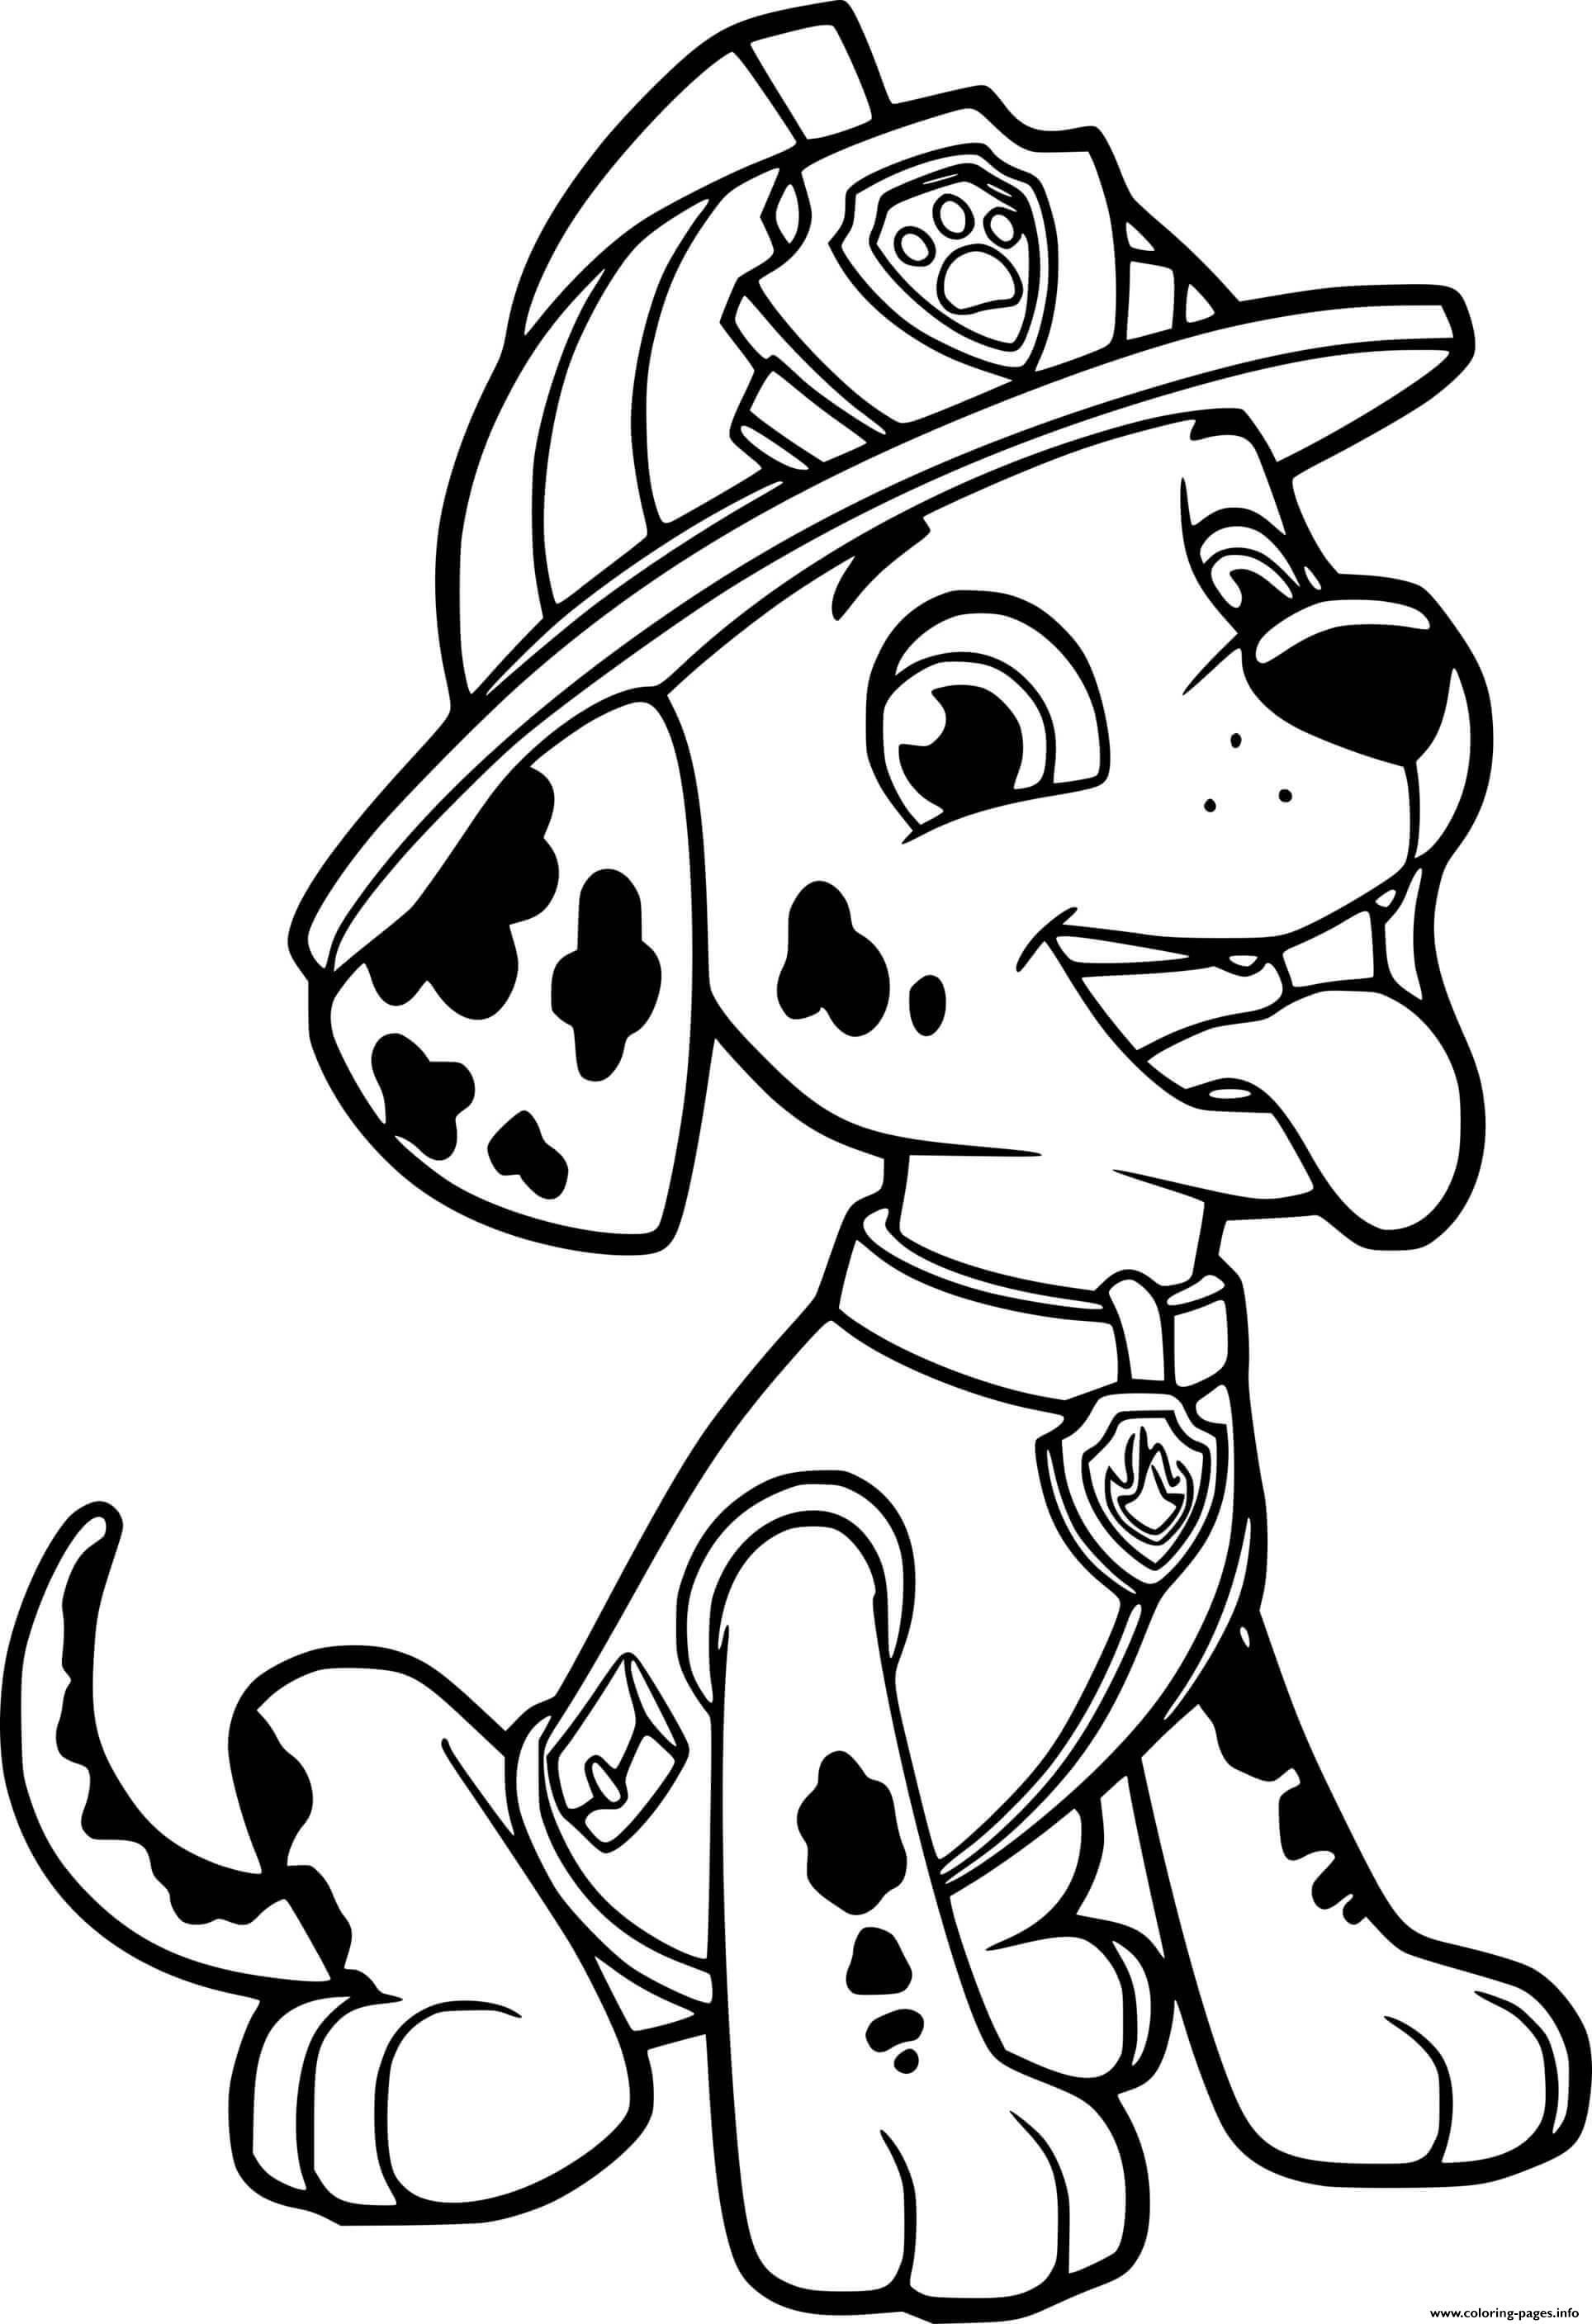 Naughty Marshall From Paw Patrol Coloring page Printable